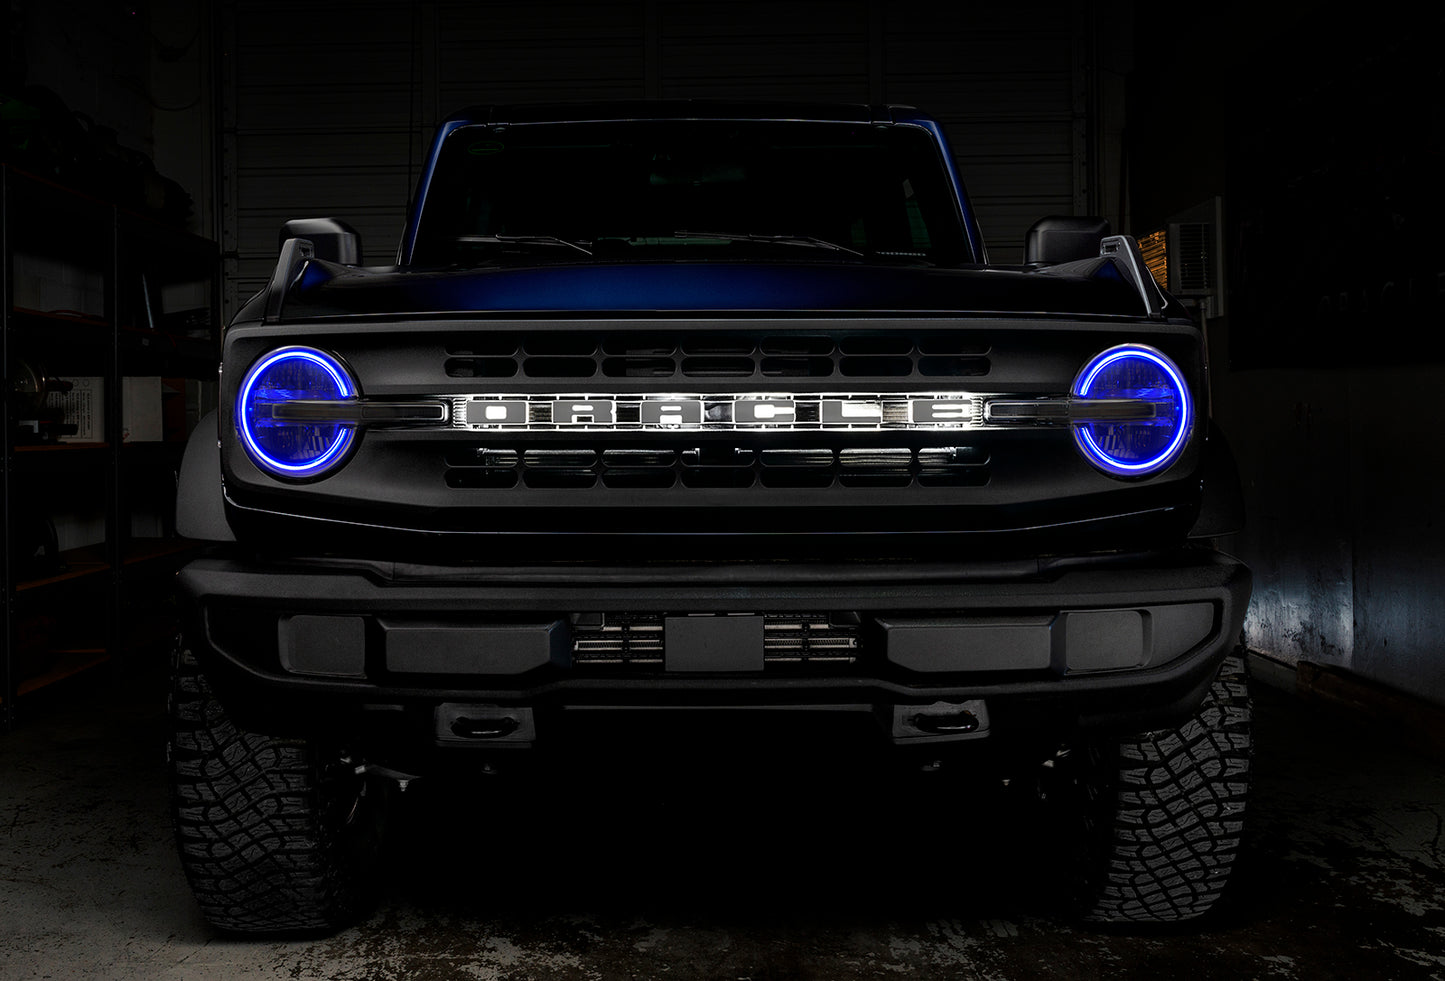 ORACLE Lighting 1468-504 Fits Ford Bronco ColorSHIFT® RGB+W Headlight Halo Upgrade Kit